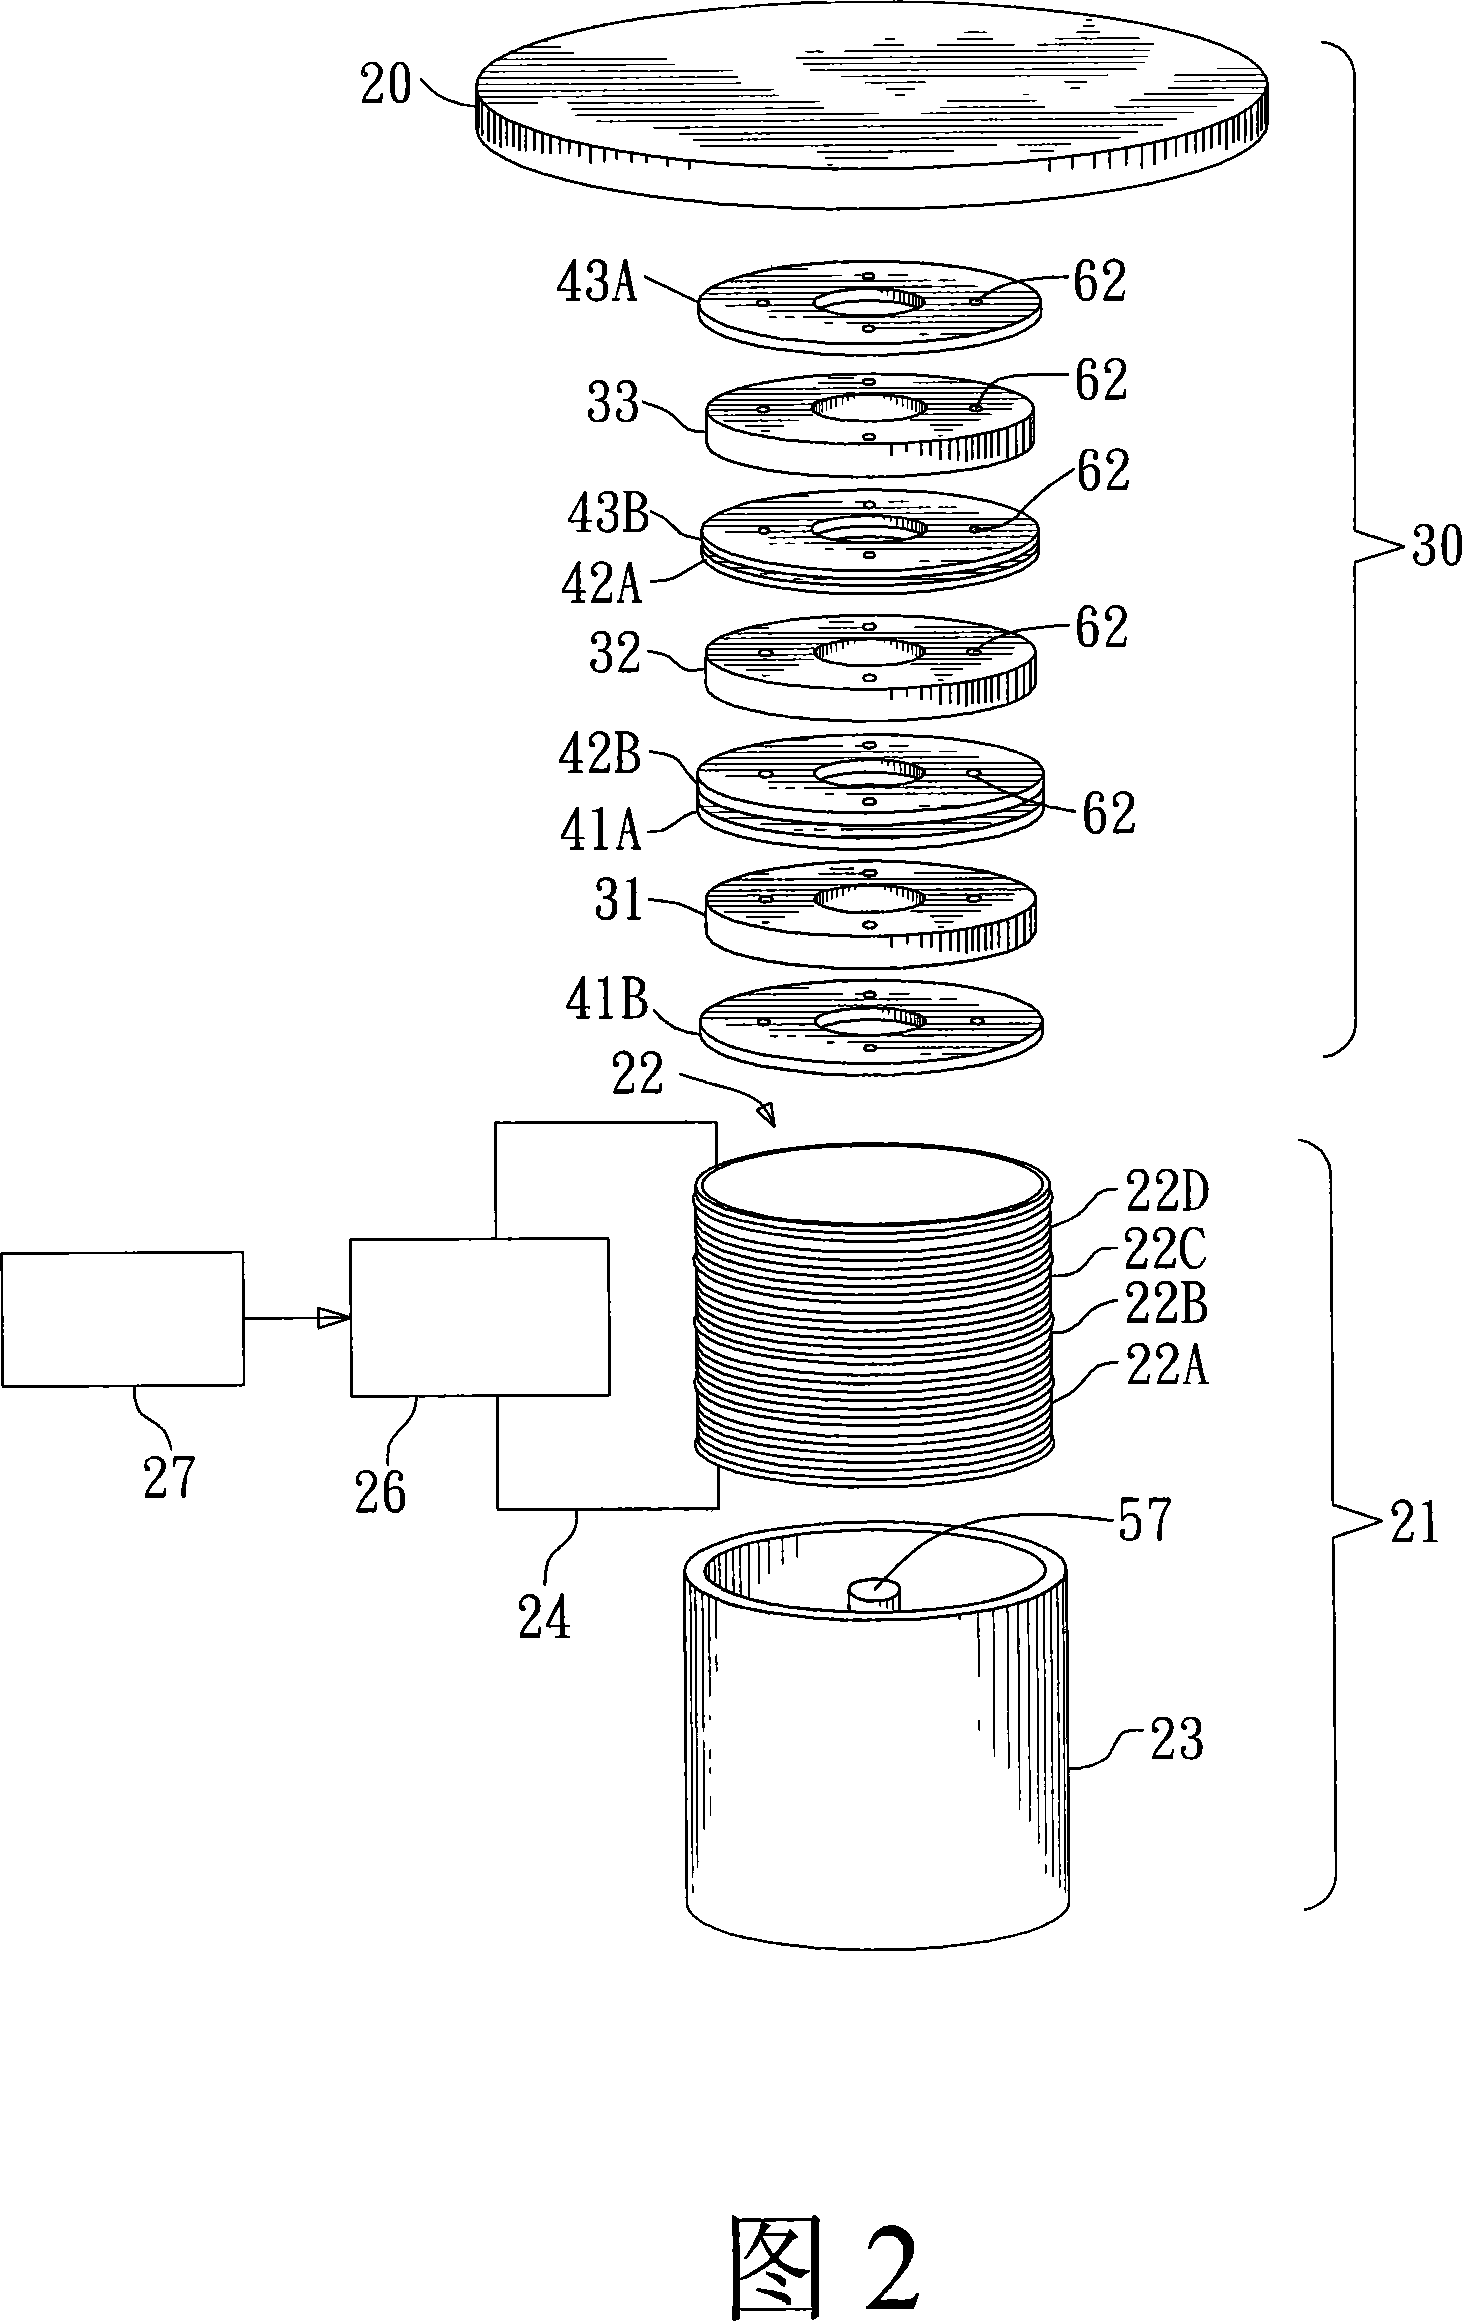 Linear motor for imparting vibration to a supported body